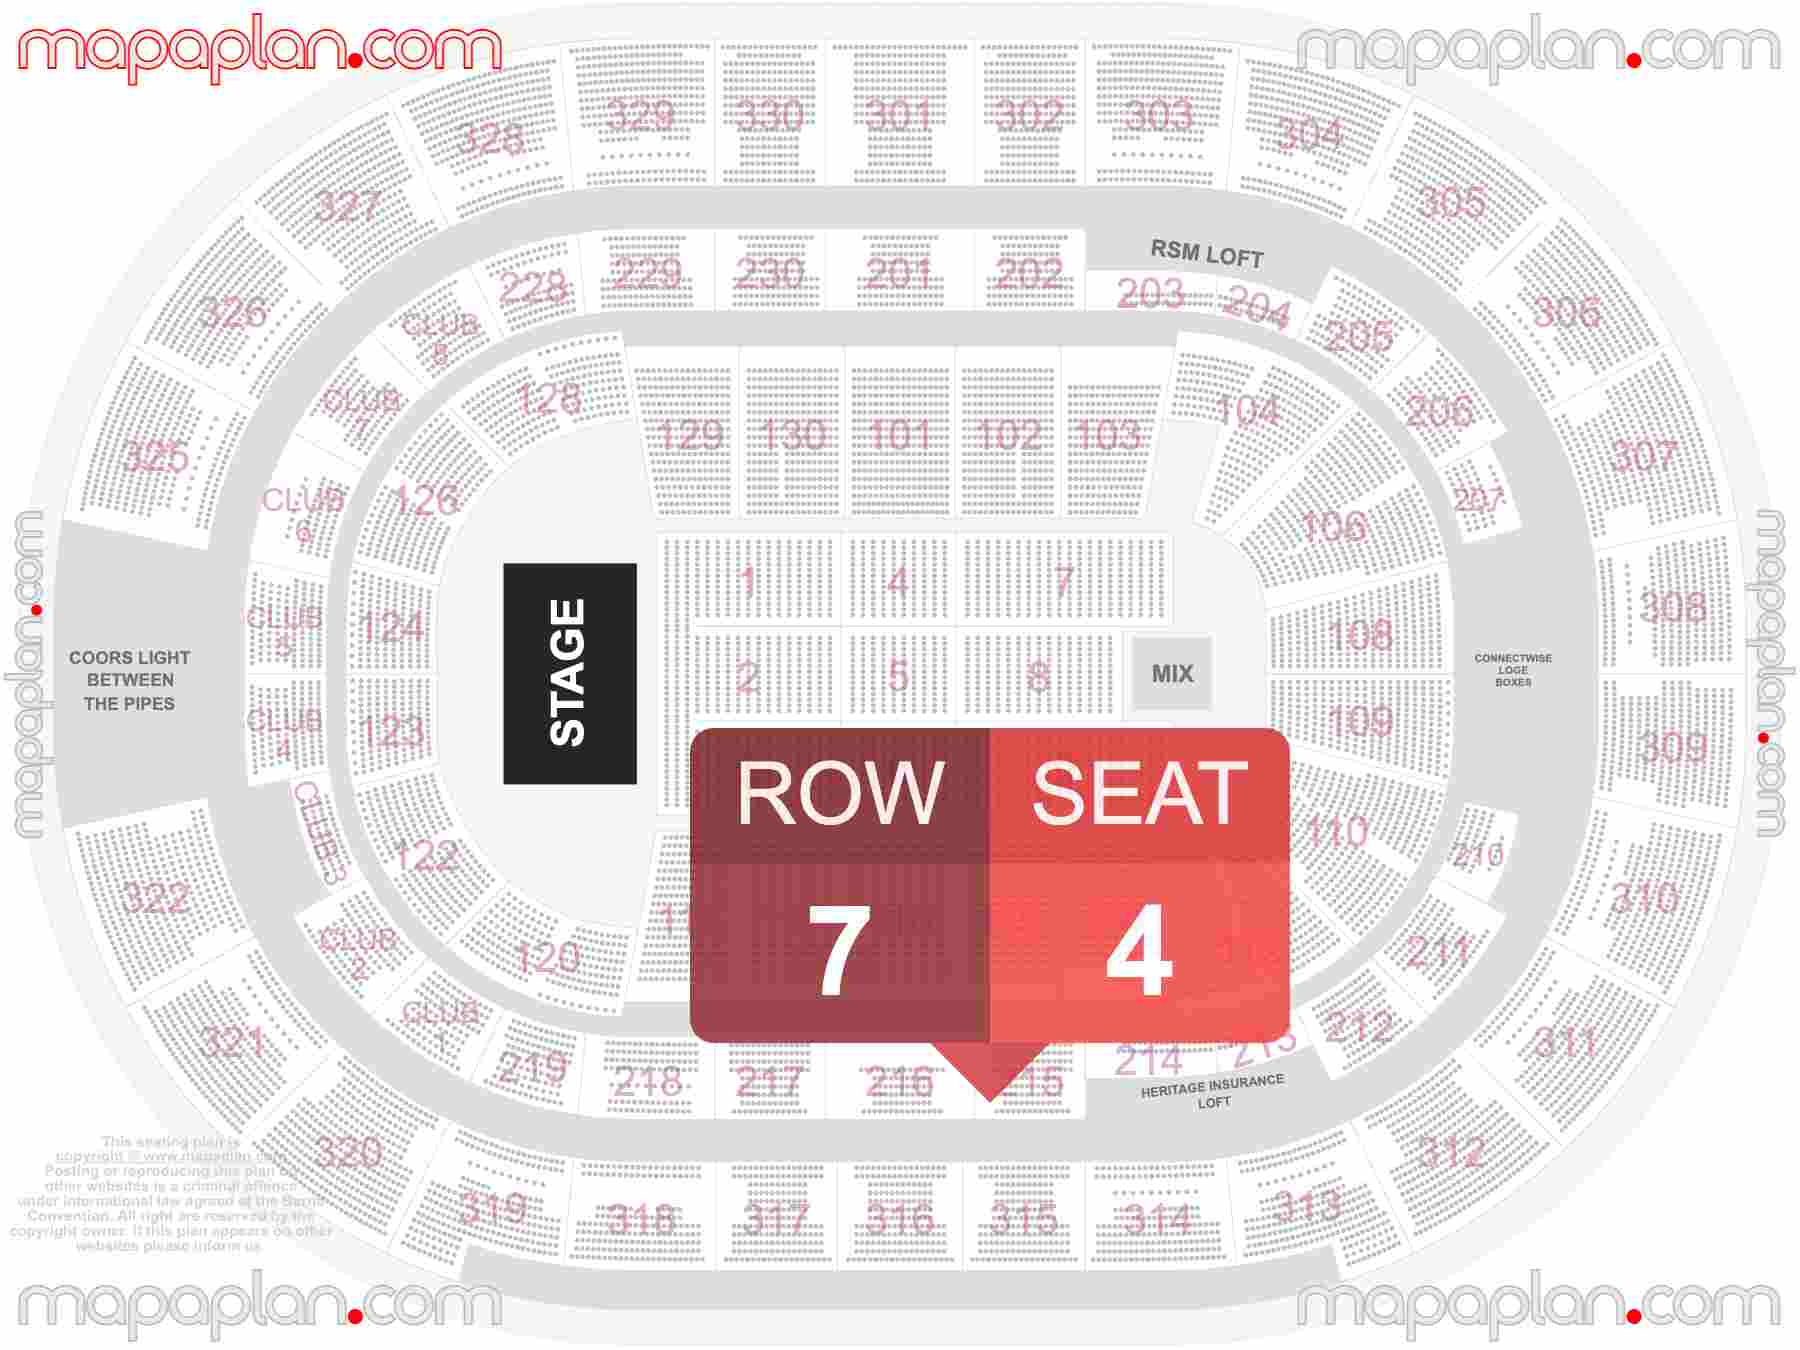 Tampa Amalie Arena seating chart Concert detailed seat numbers and row numbering chart with interactive map plan layout